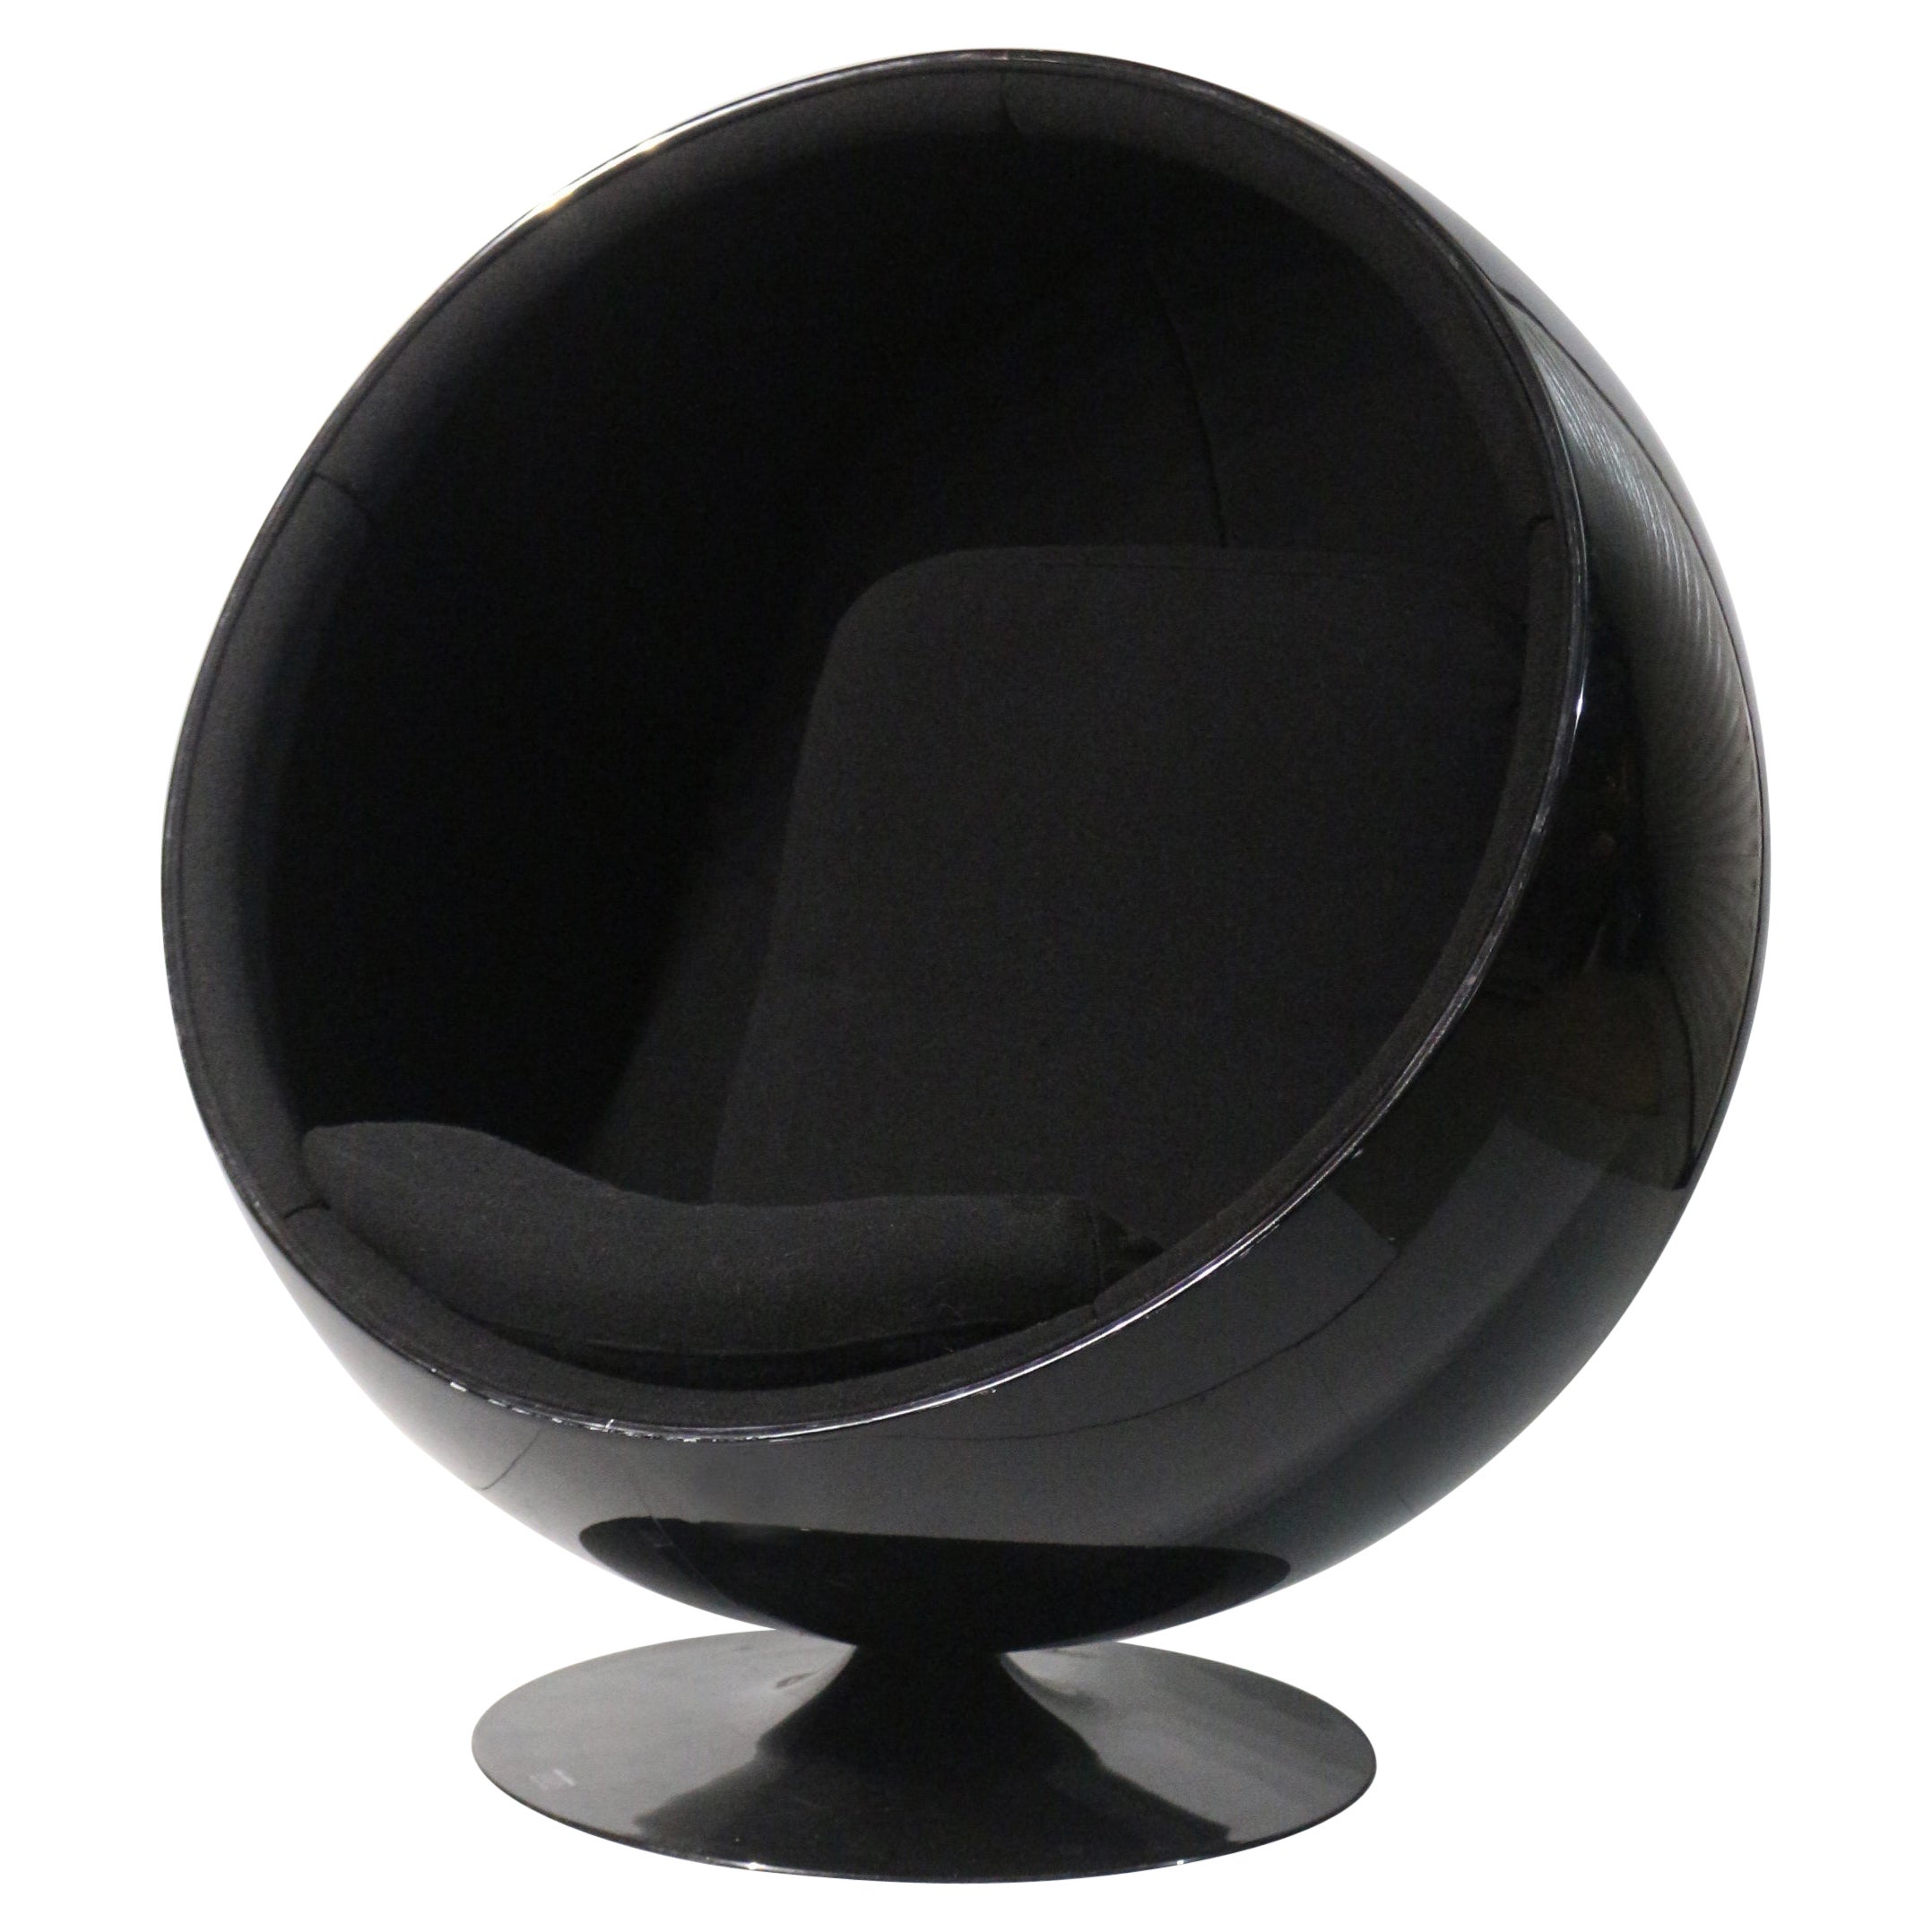 Authentic ball chair by Ero Aarnio 1980 For Sale